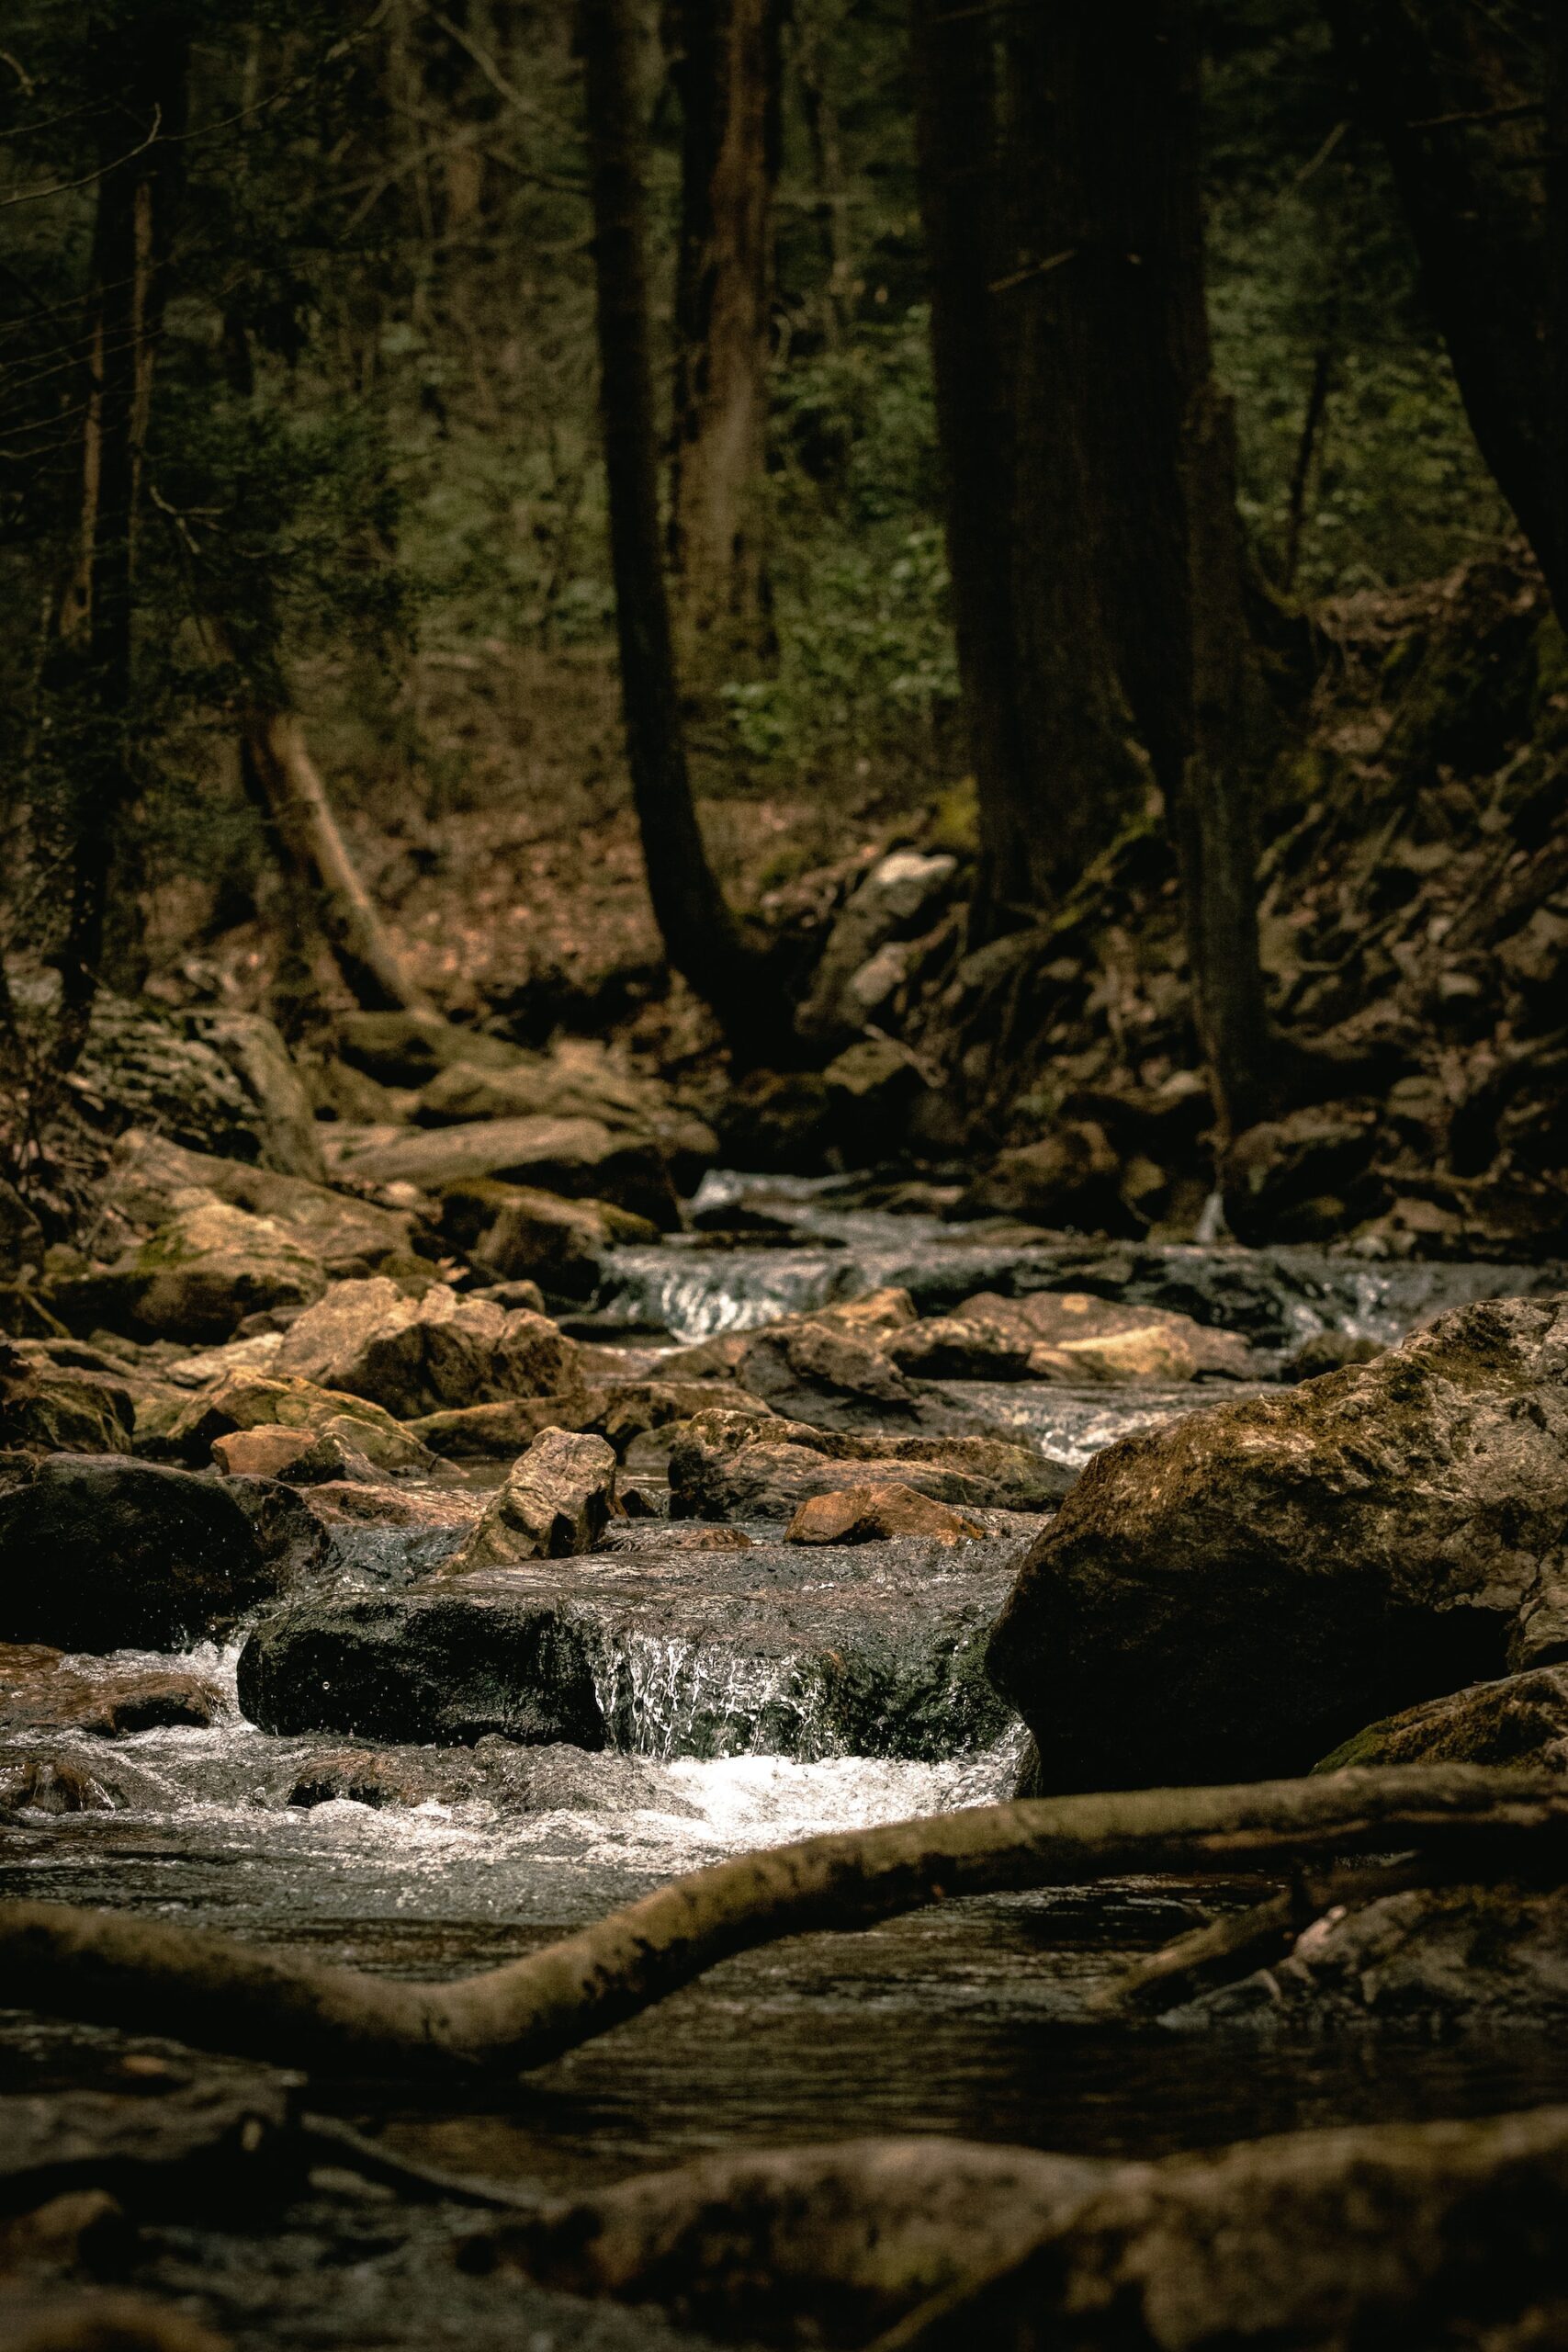 A rocky stream in the forest in Pennsylvania.